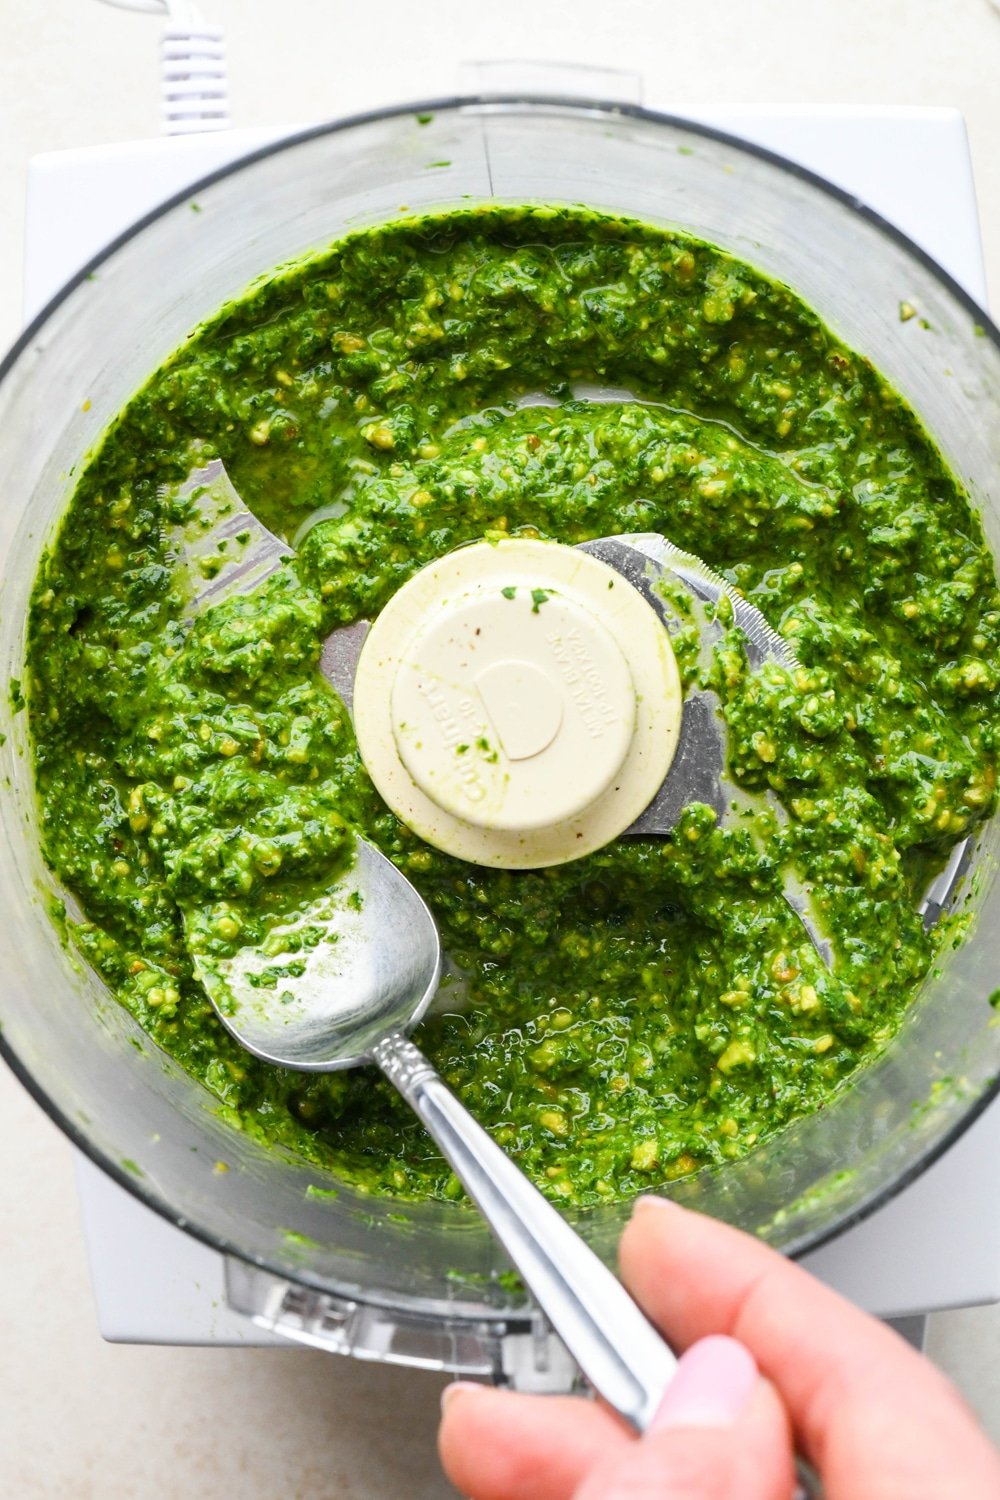 How to make pistachio pesto: A spoon angled into food processor container with creamy pesto after adding olive oil.